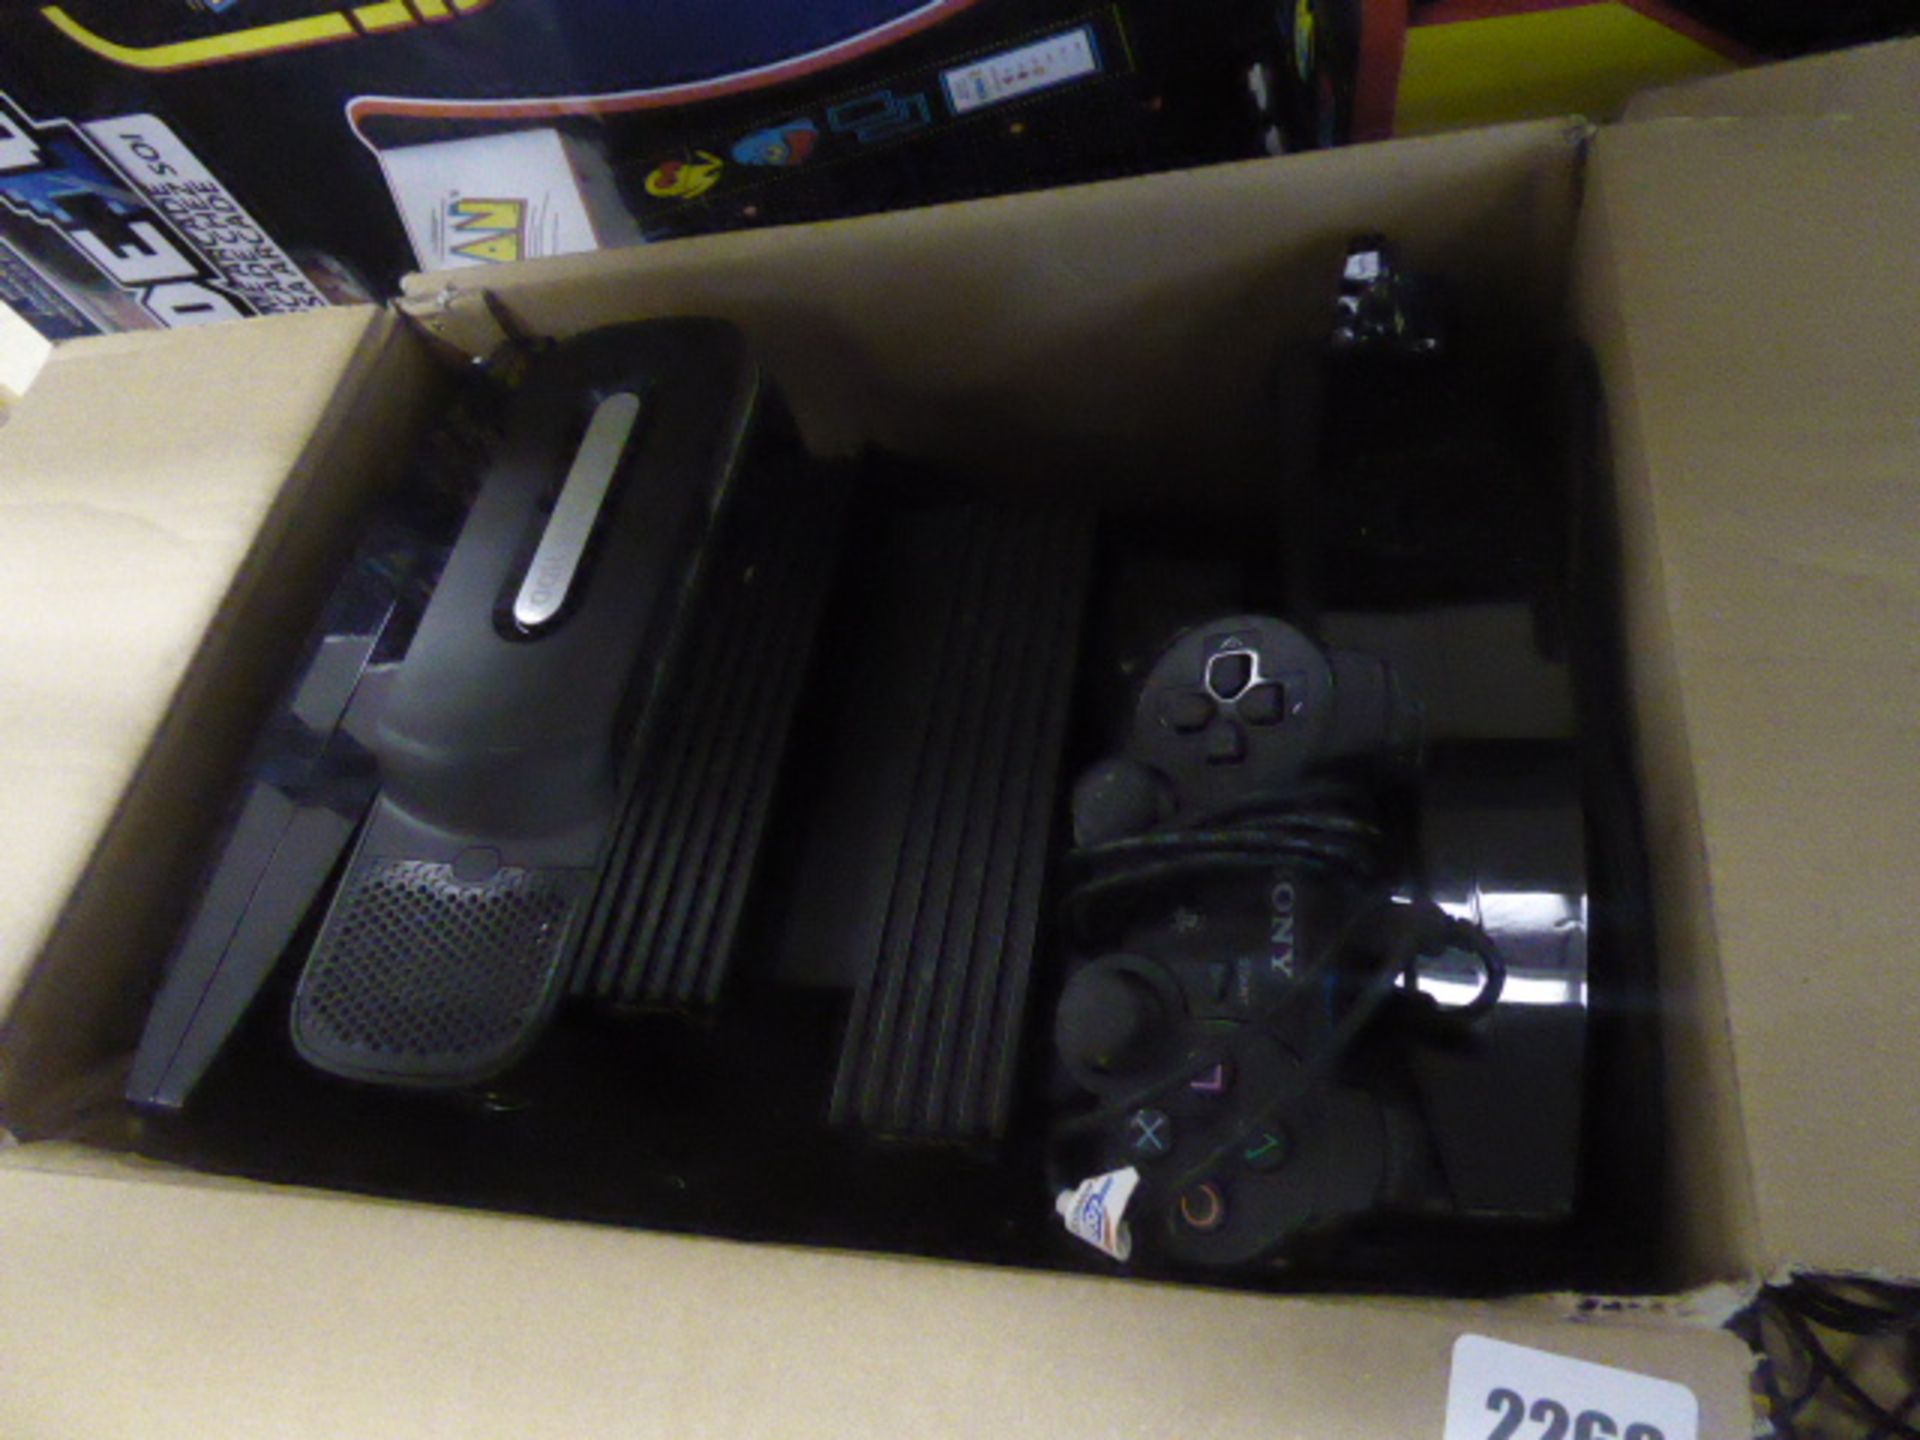 Xbox, Playstation 2 and Playstation 3 consoles in cardboard box